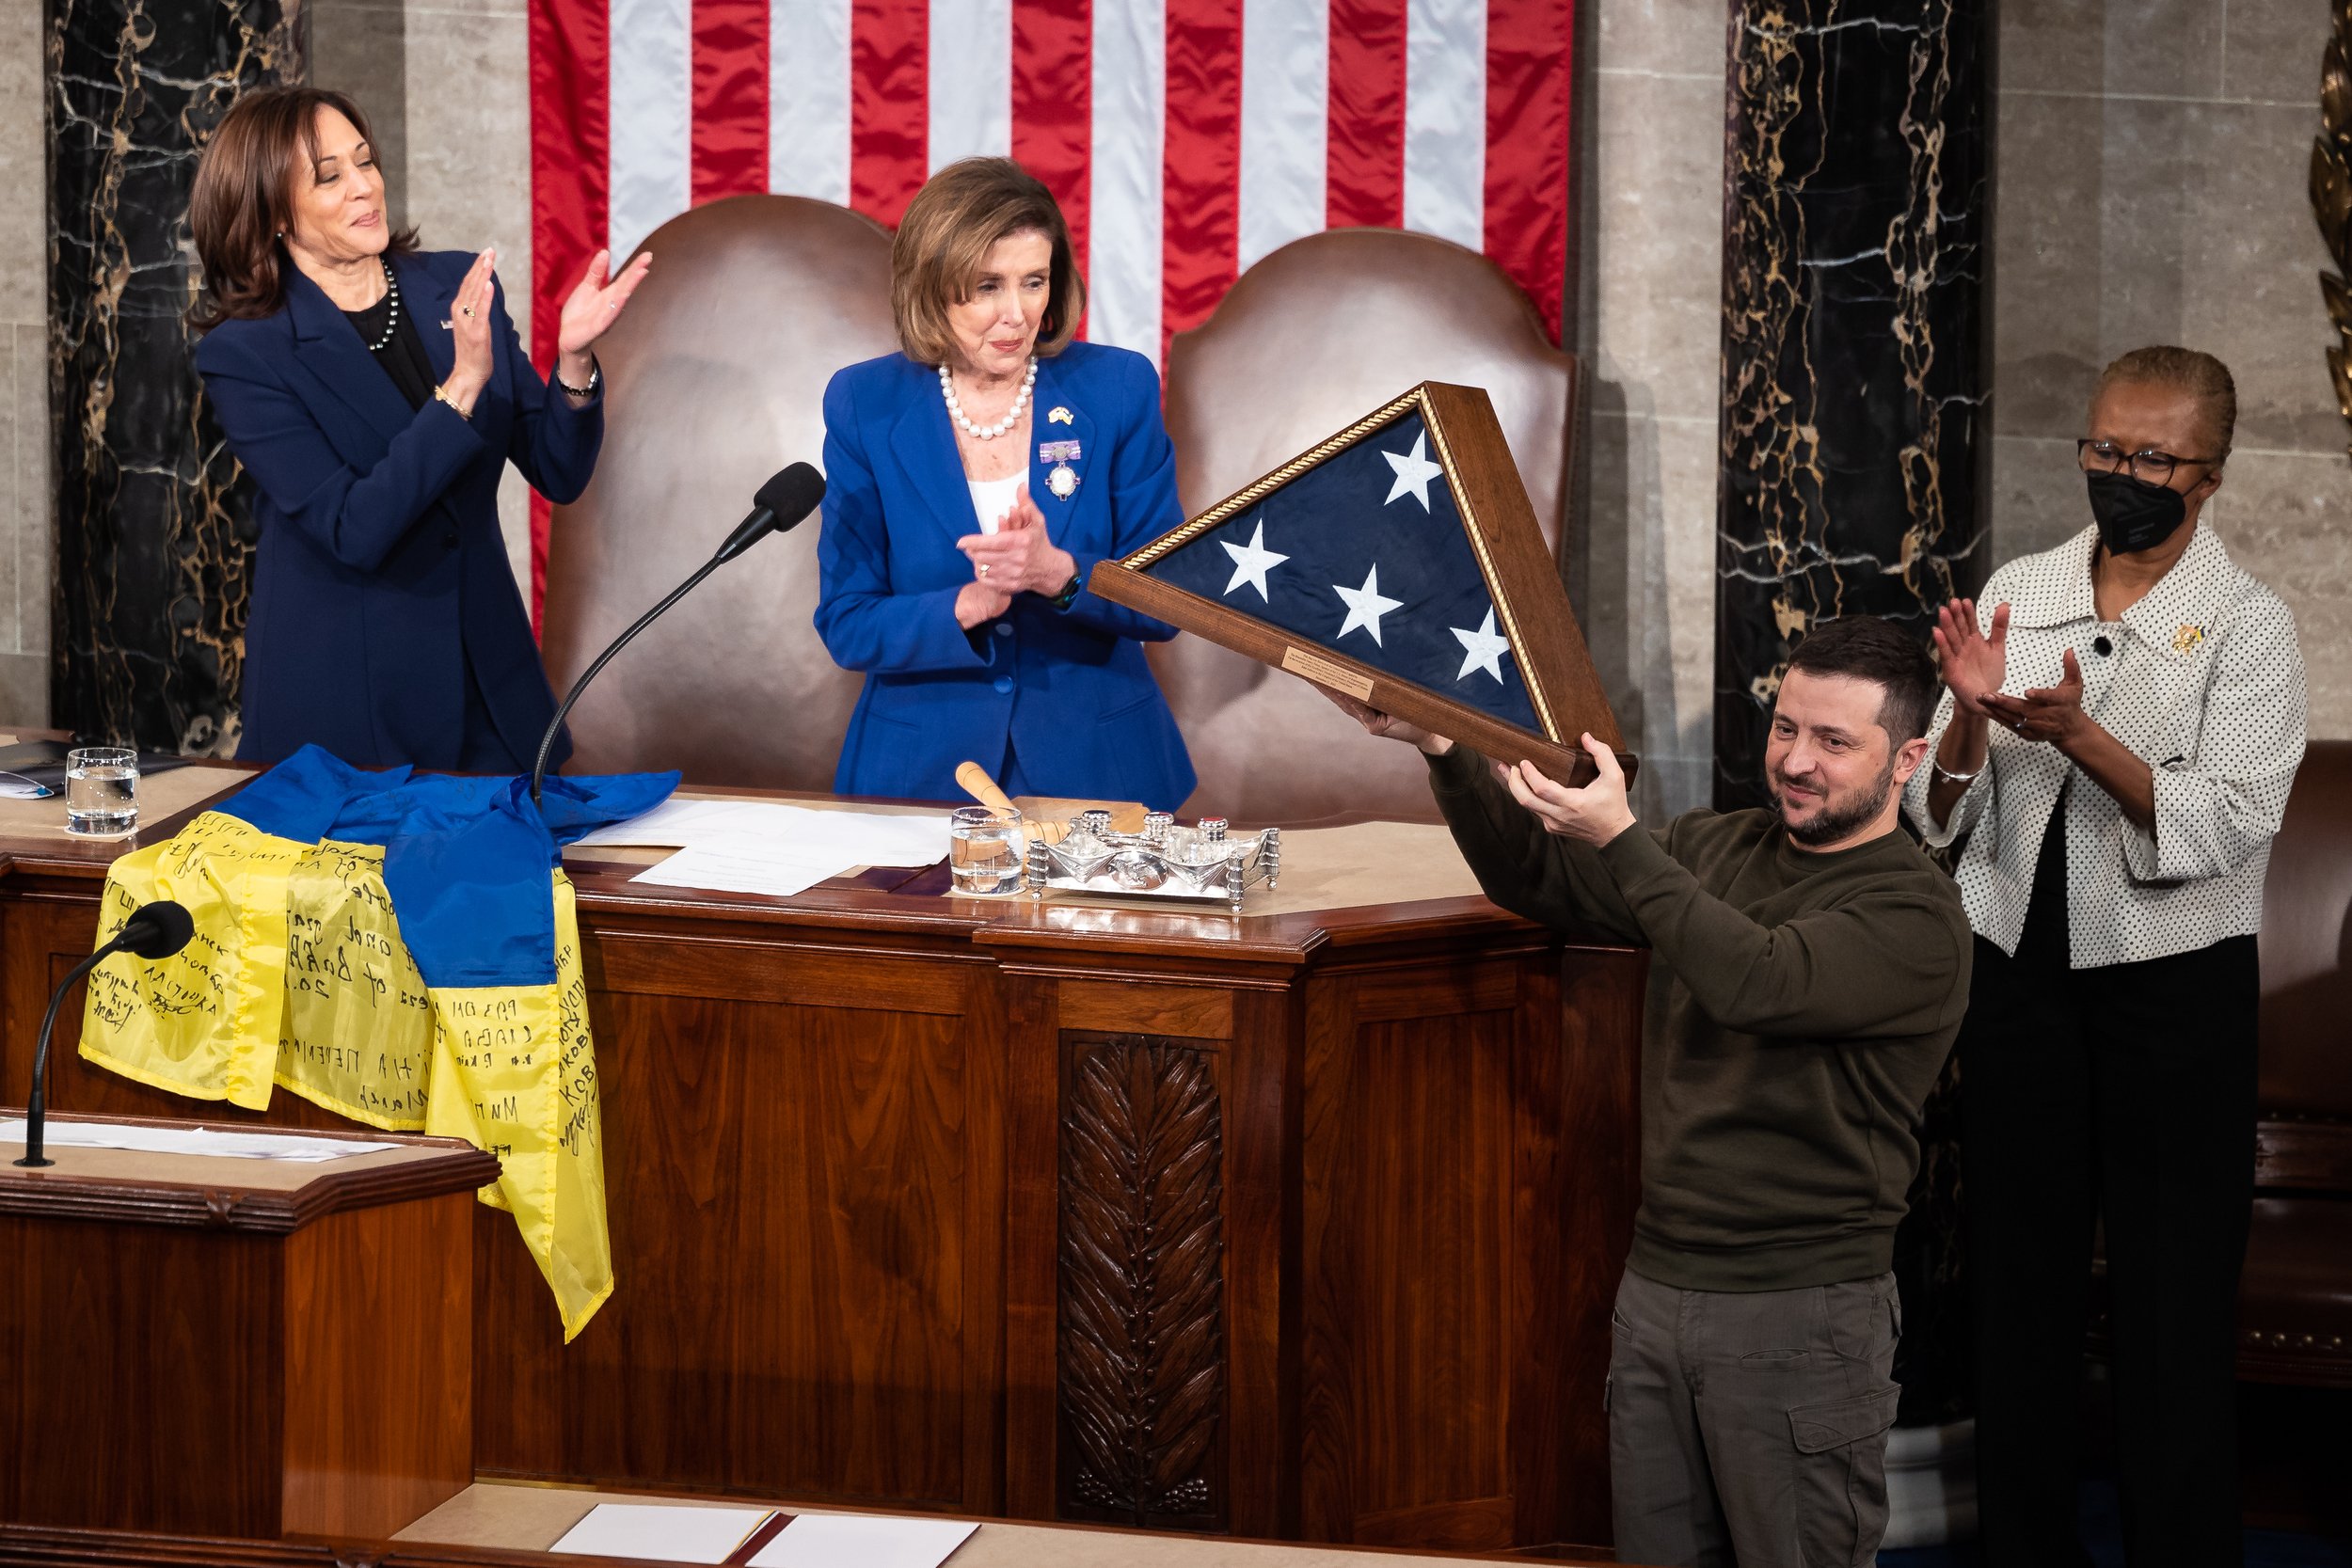  After addressing a joint session of Congress, Ukraine President Volodymyr Zelenskyy holds up a U.S. flag gifted to him by House Speaker Nancy Pelosi (D-Calif.) while Pelosi and Vice President Kamala Harris applaud a joint session of Congress in the 